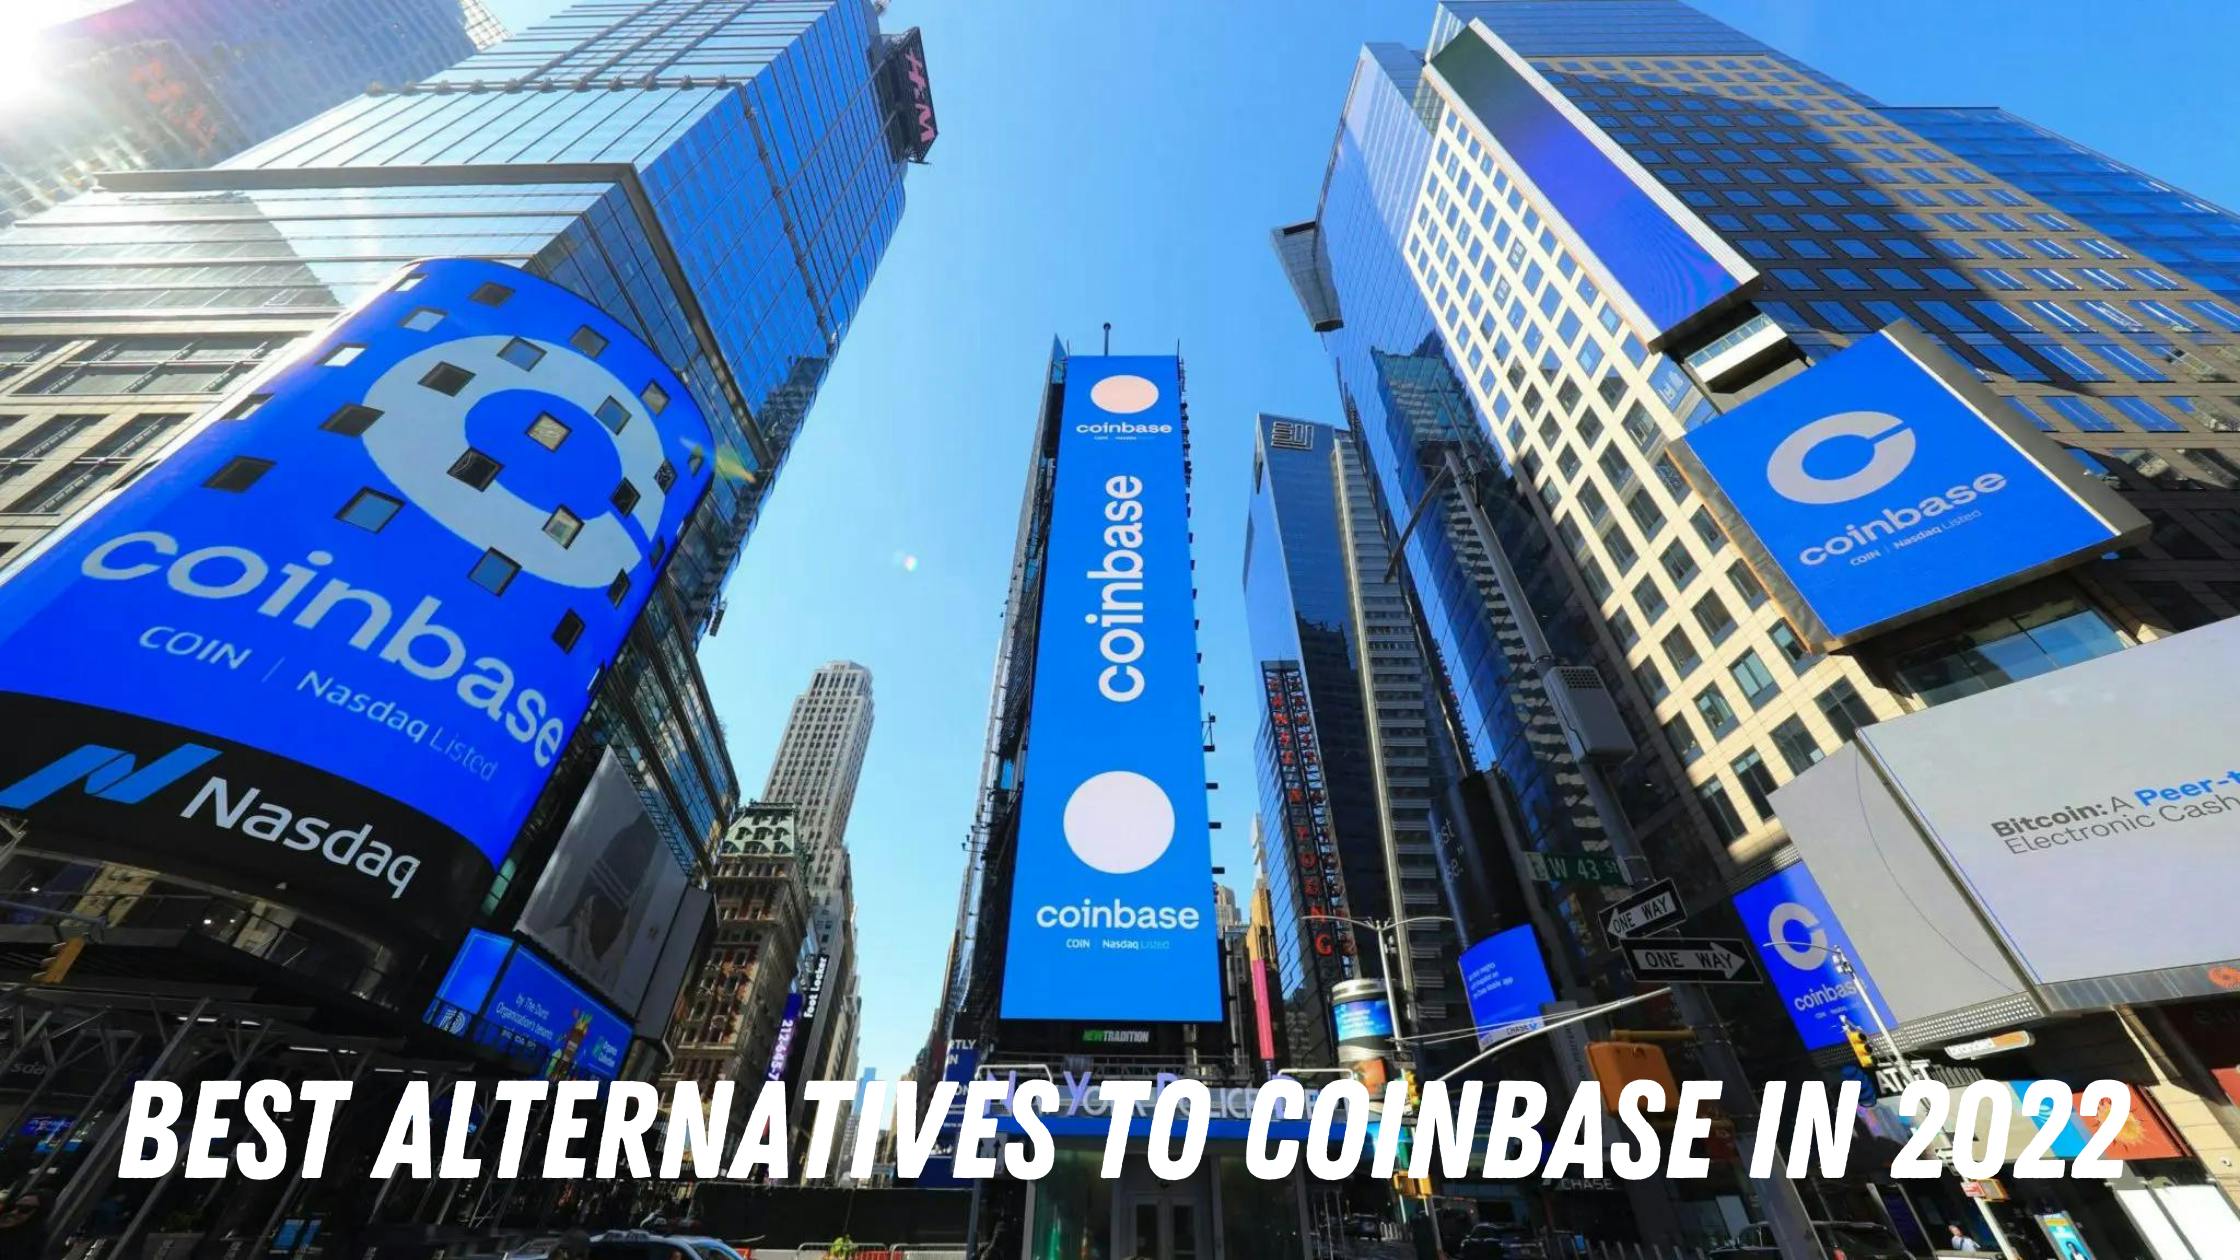 Best Alternatives to Coinbase in 2022: A detailed guide